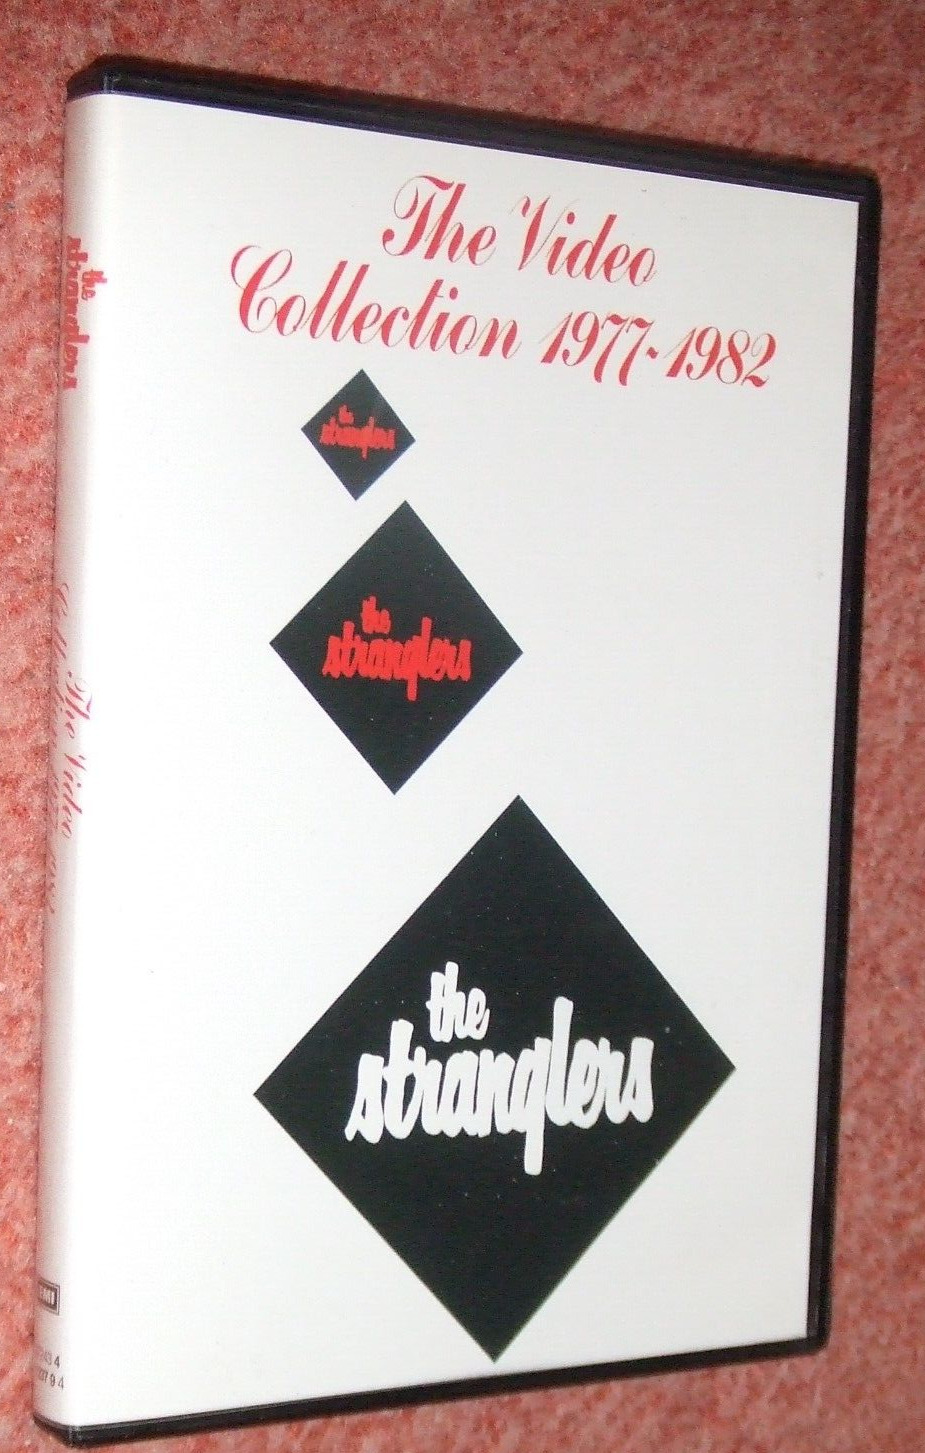 The Stranglers : The Video Collection 1977-1982 DVD (2001)